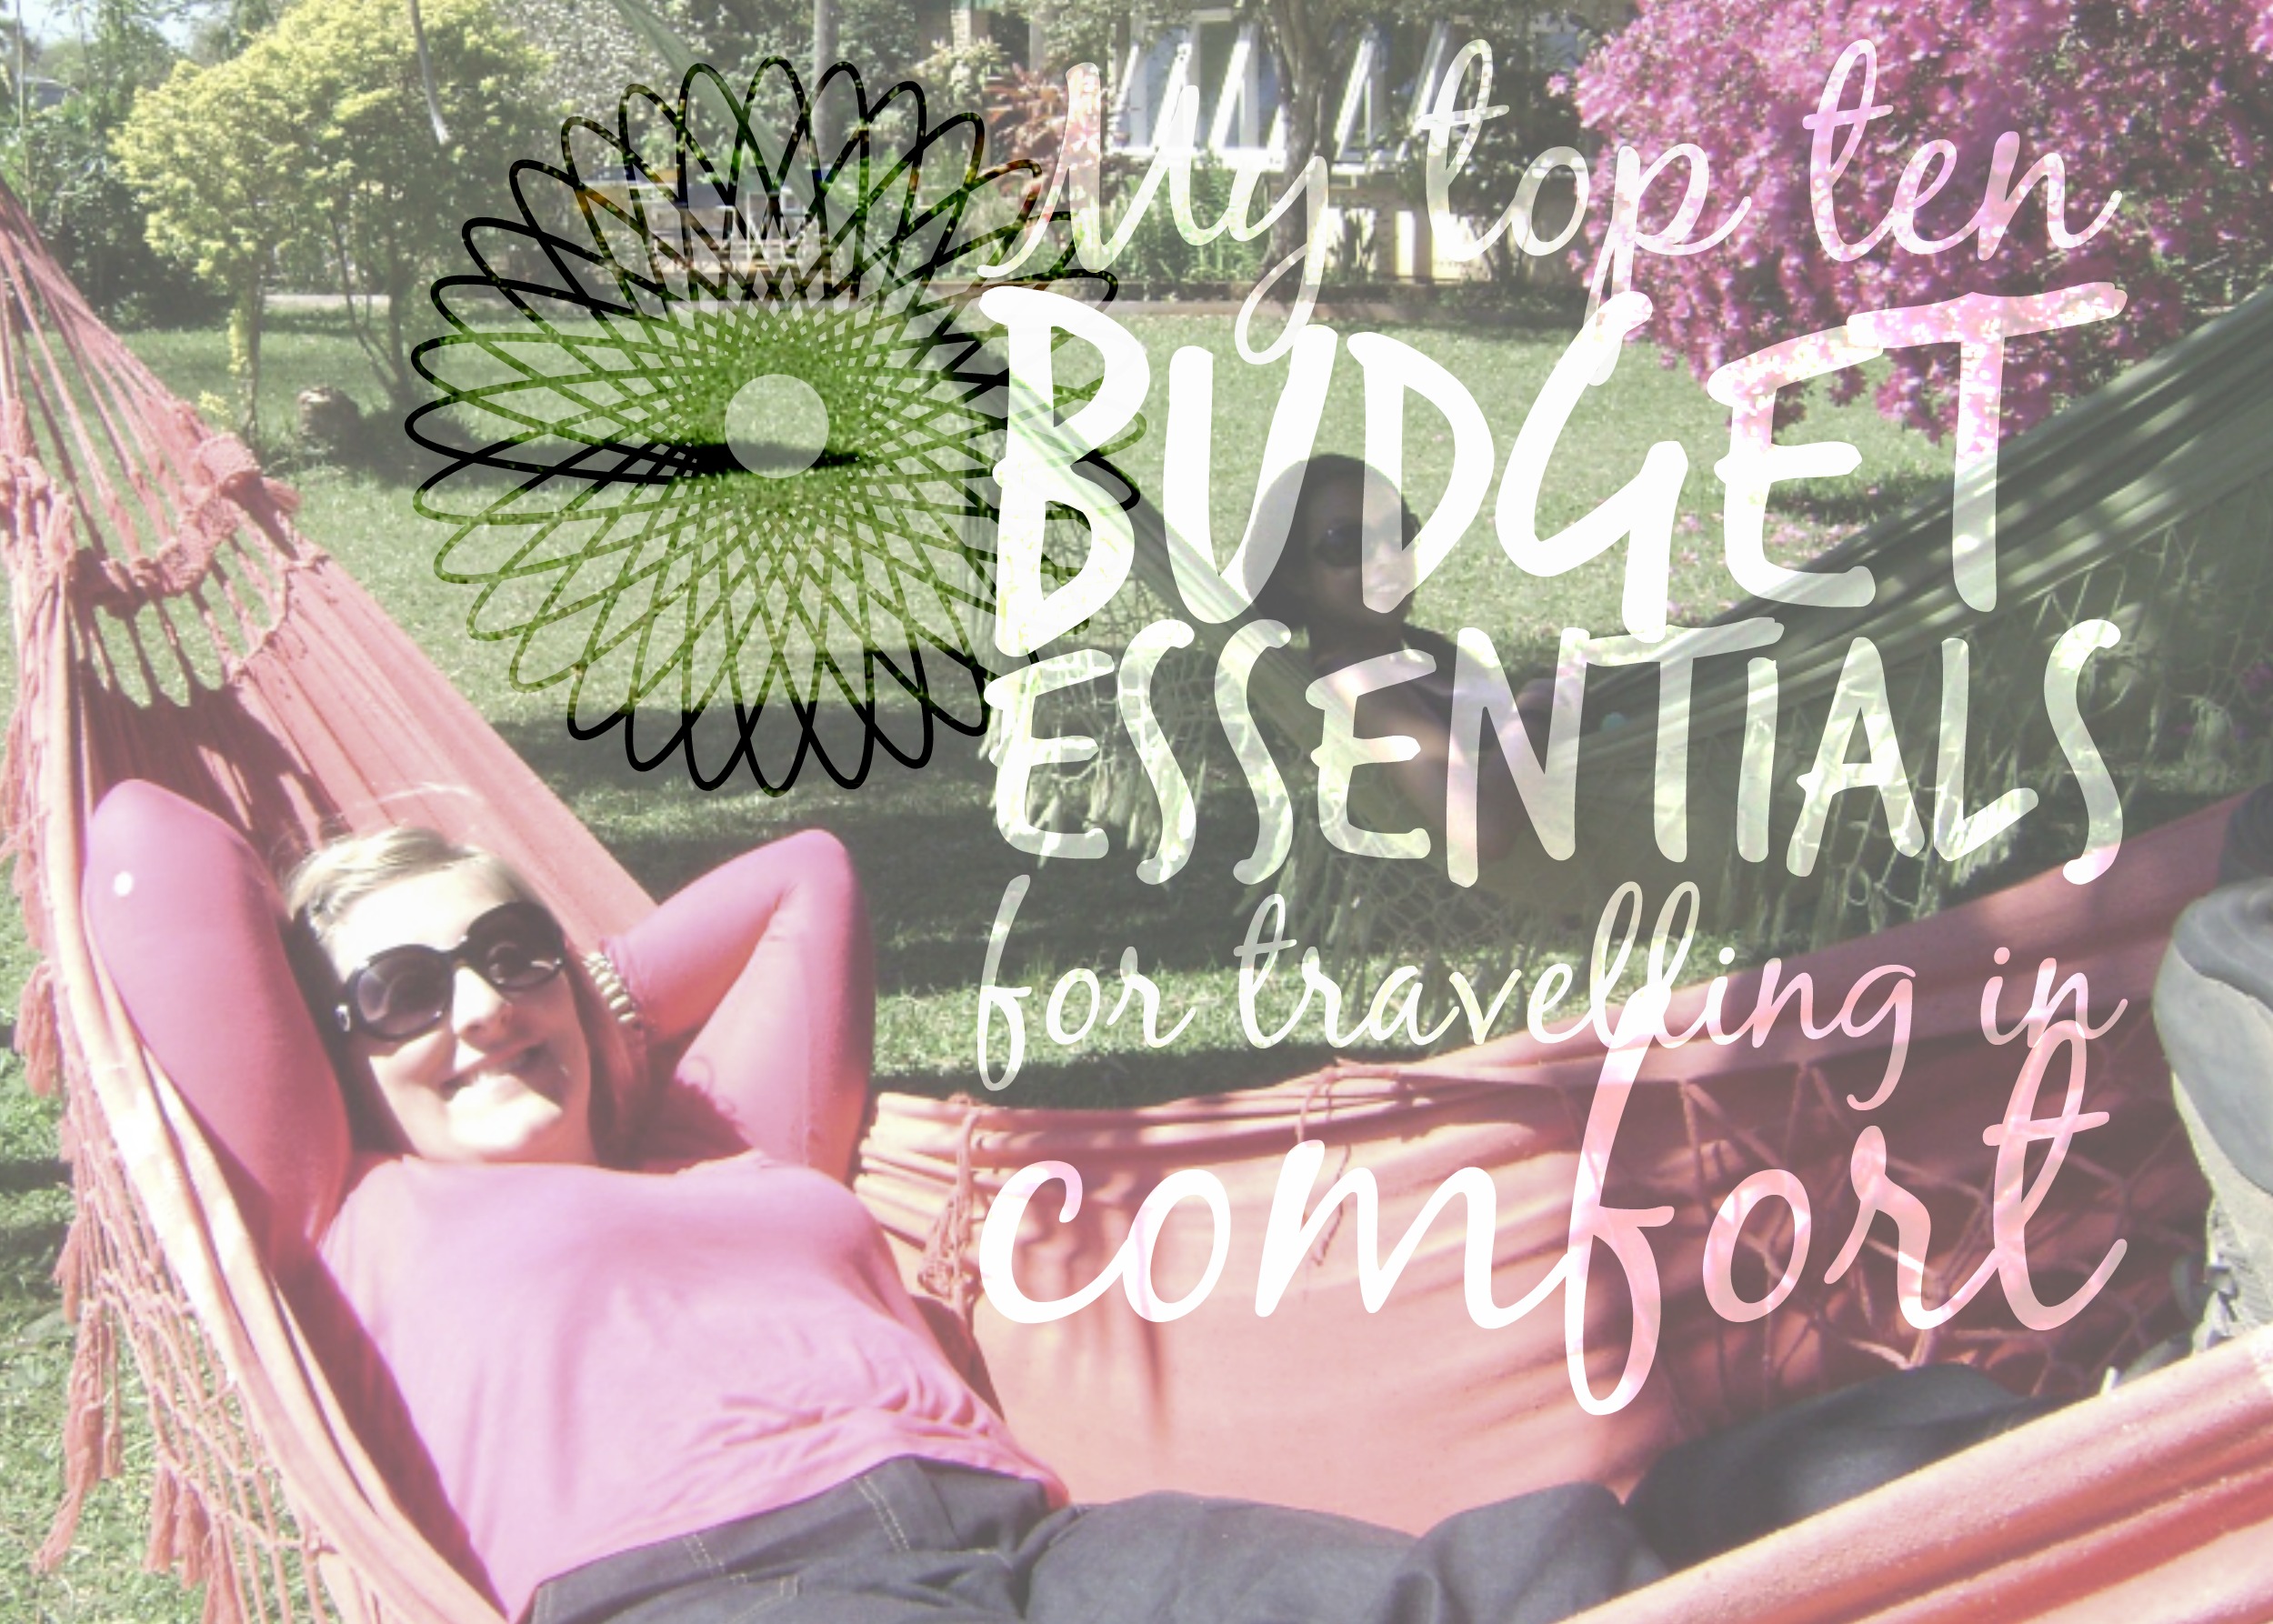 My top 10 budget essentials for travelling in comfort